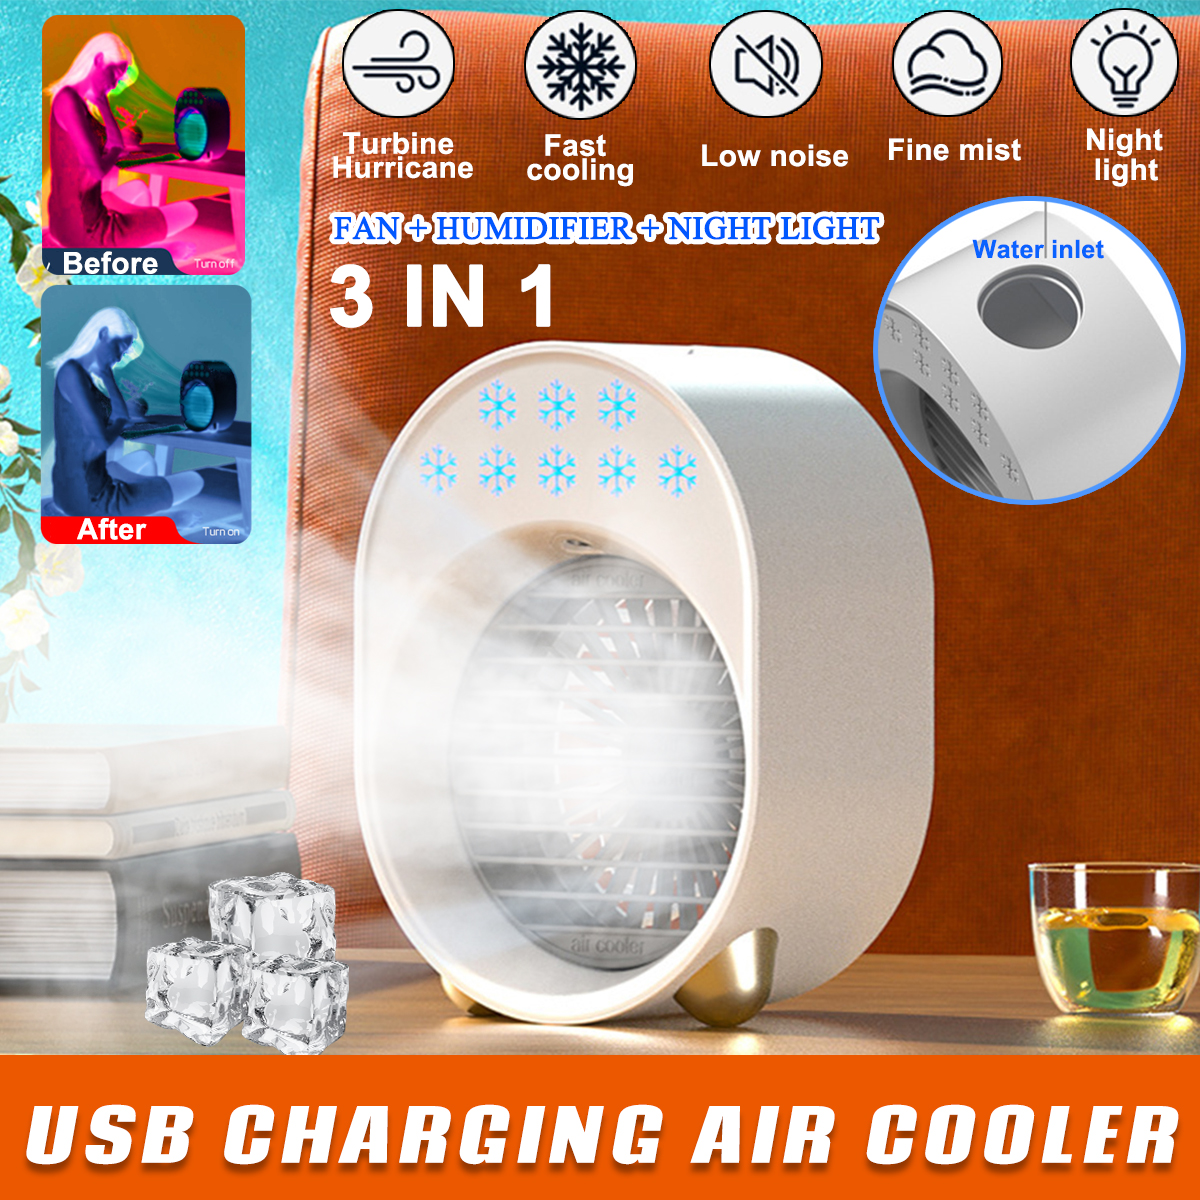 Bakeey-3-Gear-Mini-Water-Cooling-Fan-Spray-Humidification-Portable-Colorful-Night-Light-Air-Cooler-T-1838417-1